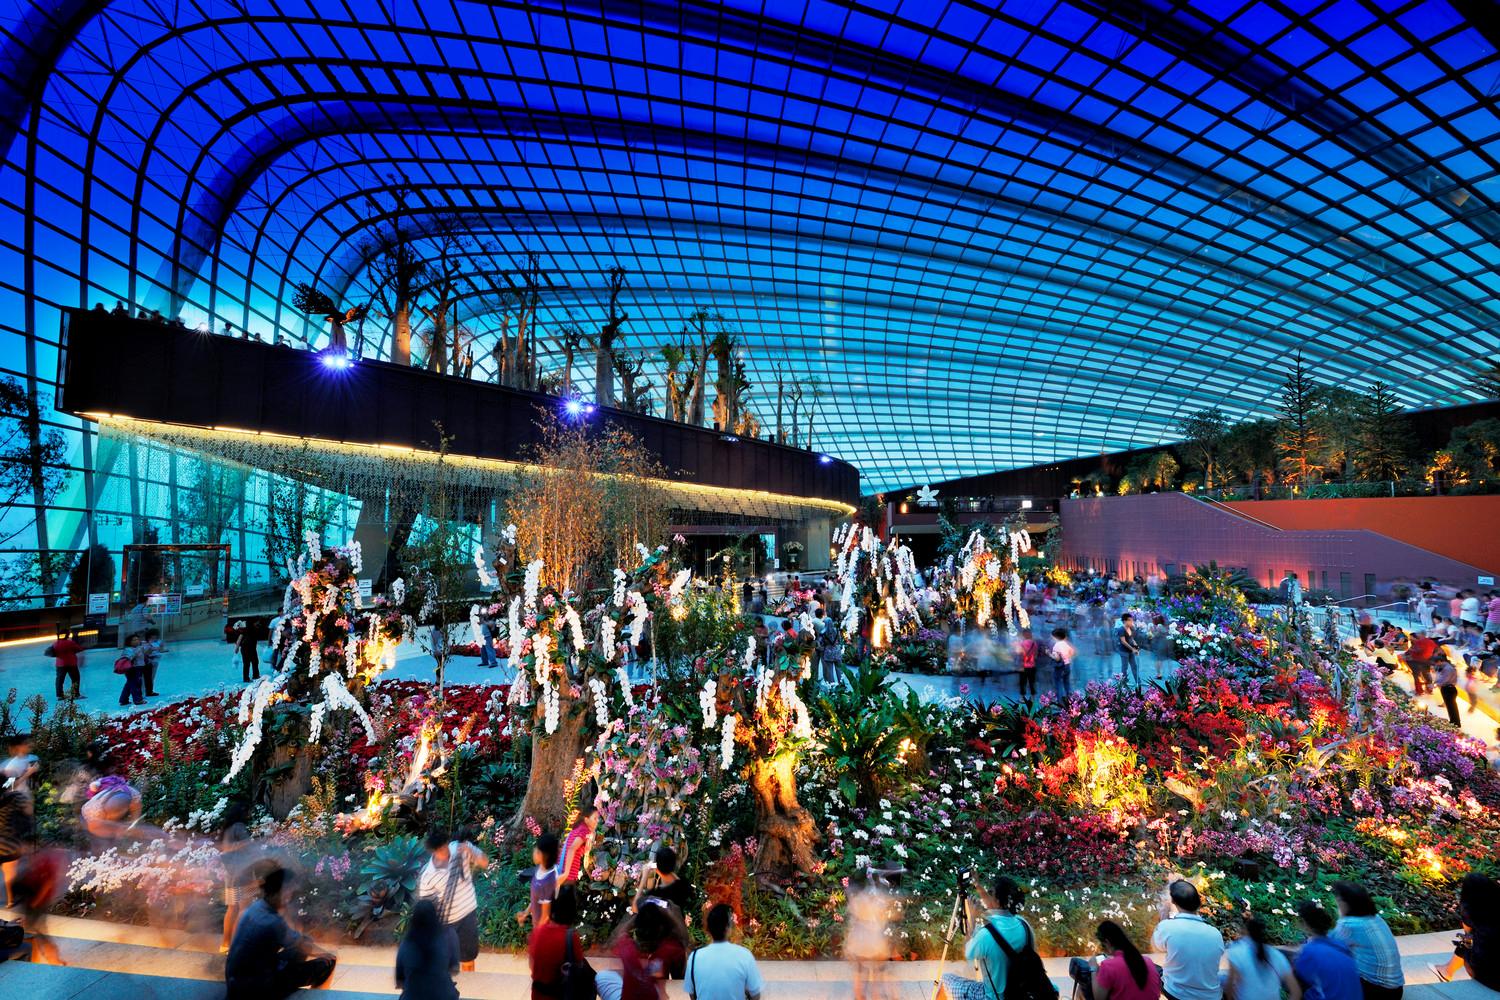 Flower dome at night